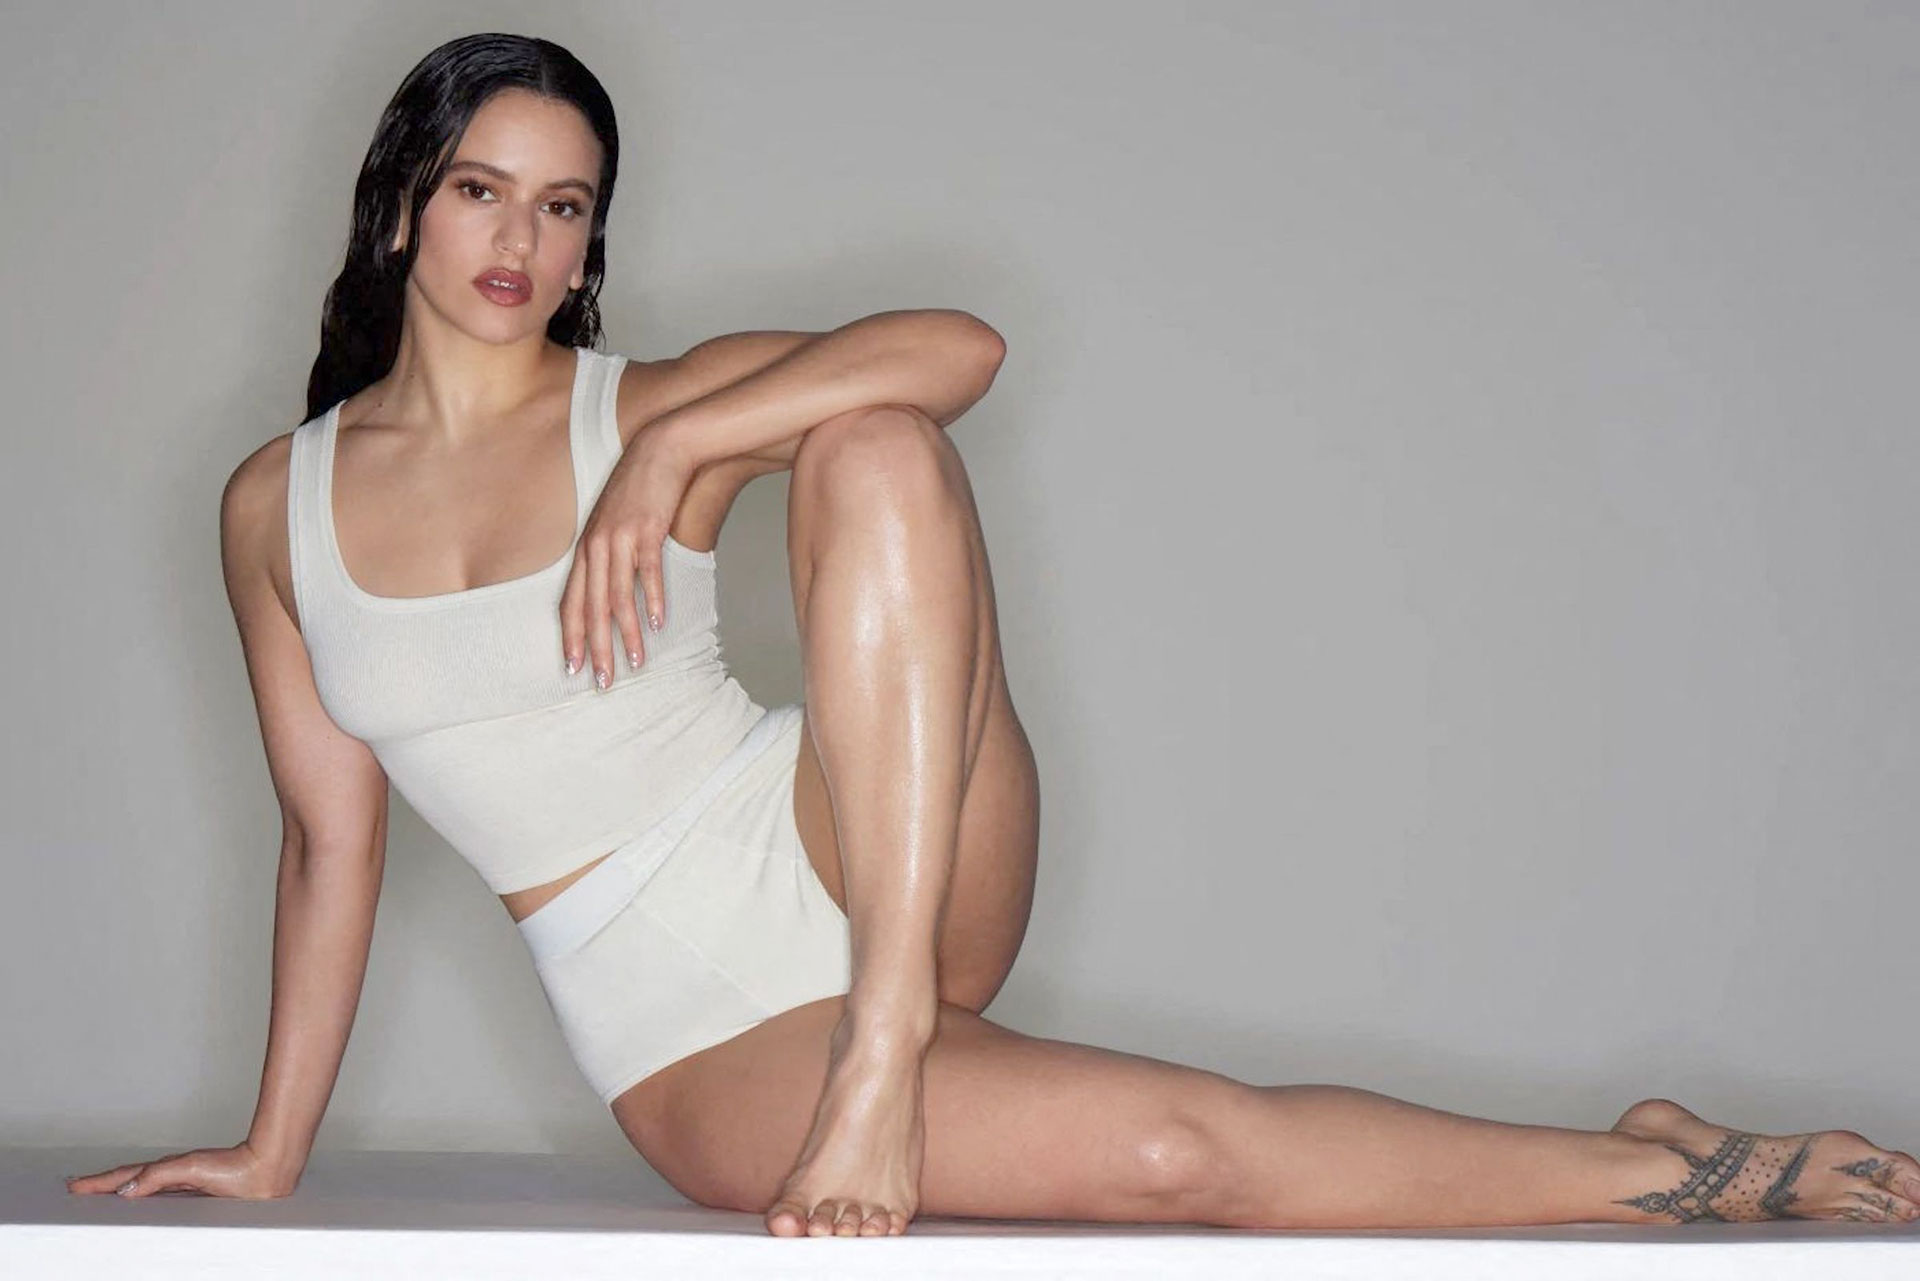 Rosalía is the new face of "Skims"Kim Kardashian's underwear firm and made a photographic production for the campaign in which she posed with the different outfits